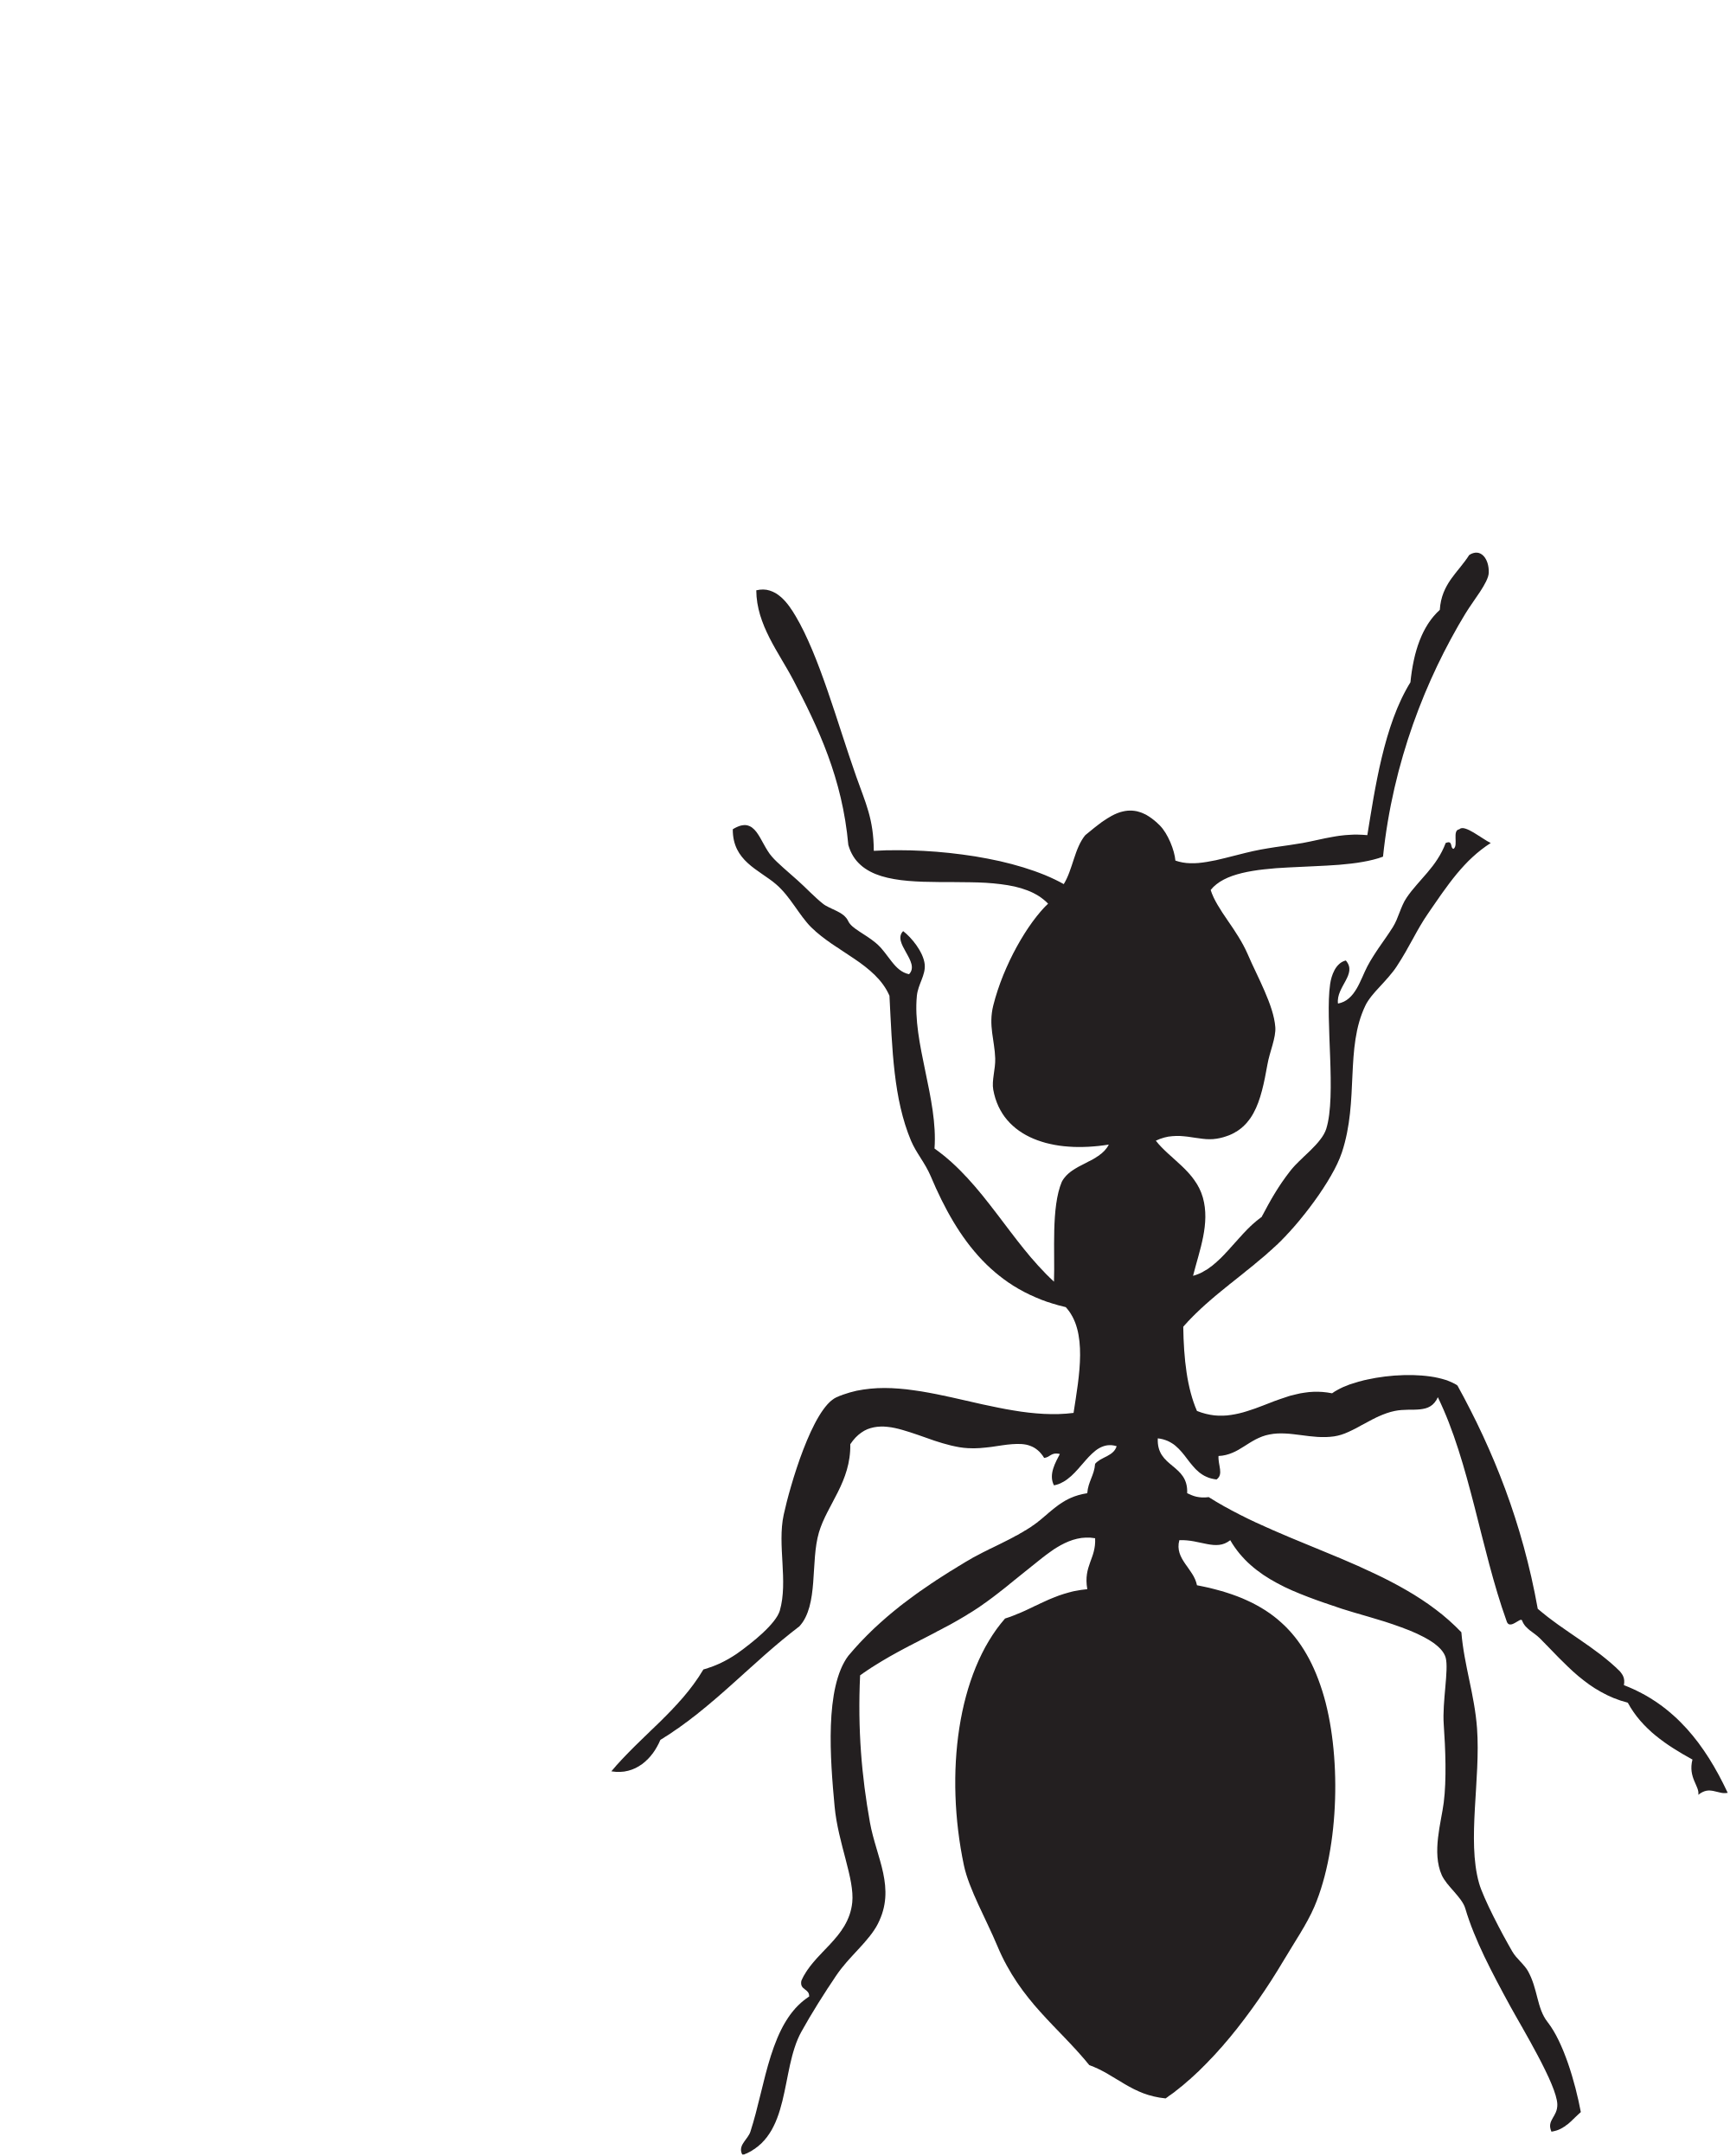 Ant svg #13, Download drawings